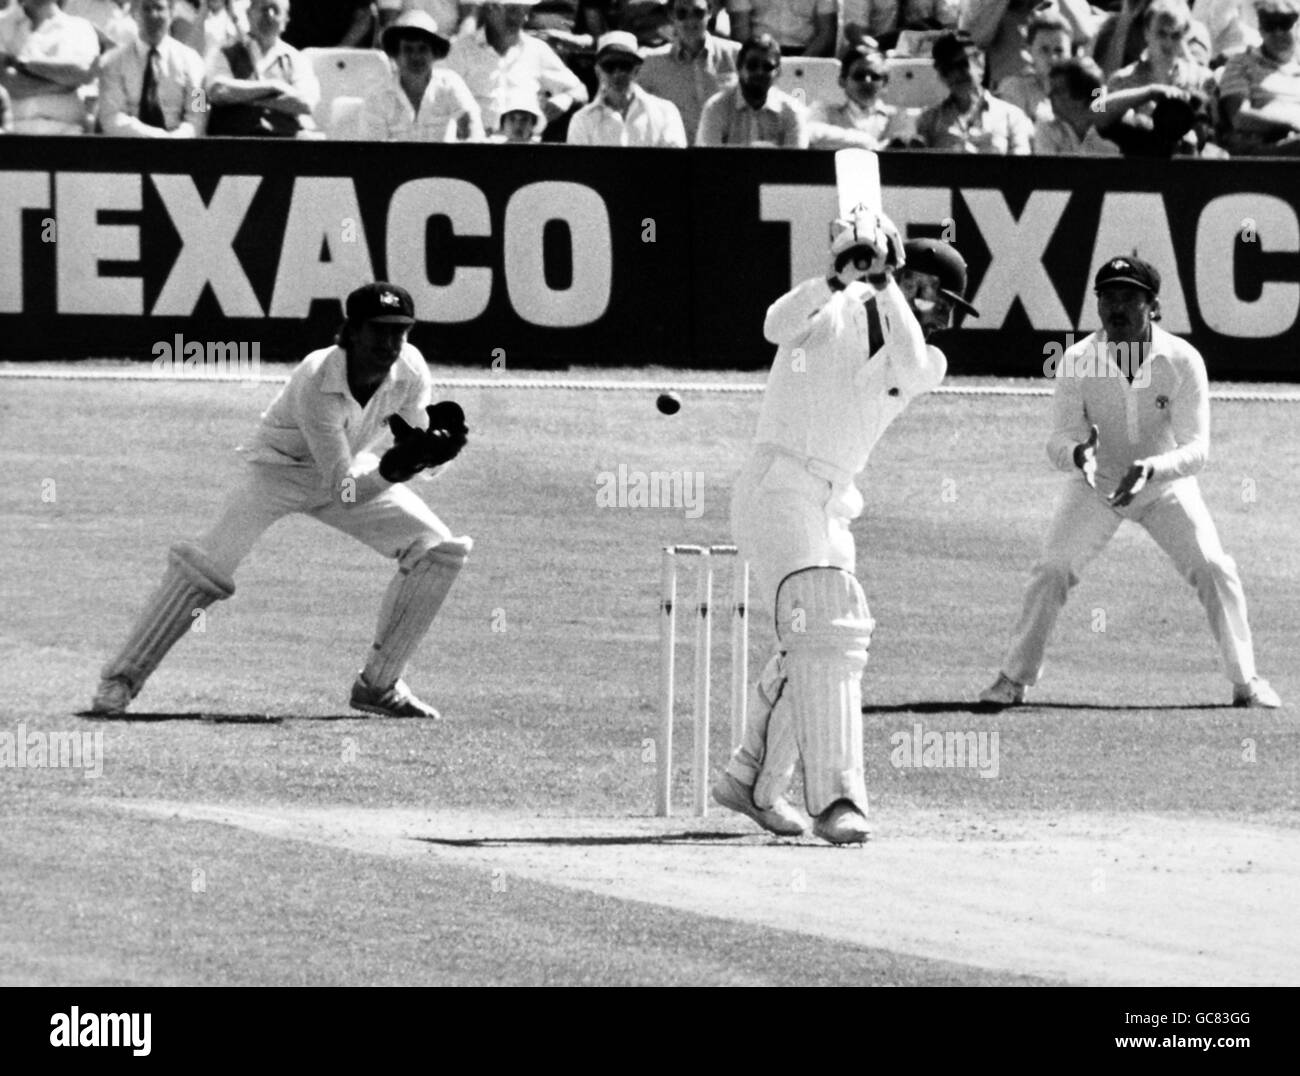 Graeme Fowler, batting for England, swings at Craig McDermott's thin delivery and is out, caught behind by wicketkeeper Wayne Phillips during first of the Texaco trophy one-day international at Old Trafford Stock Photo